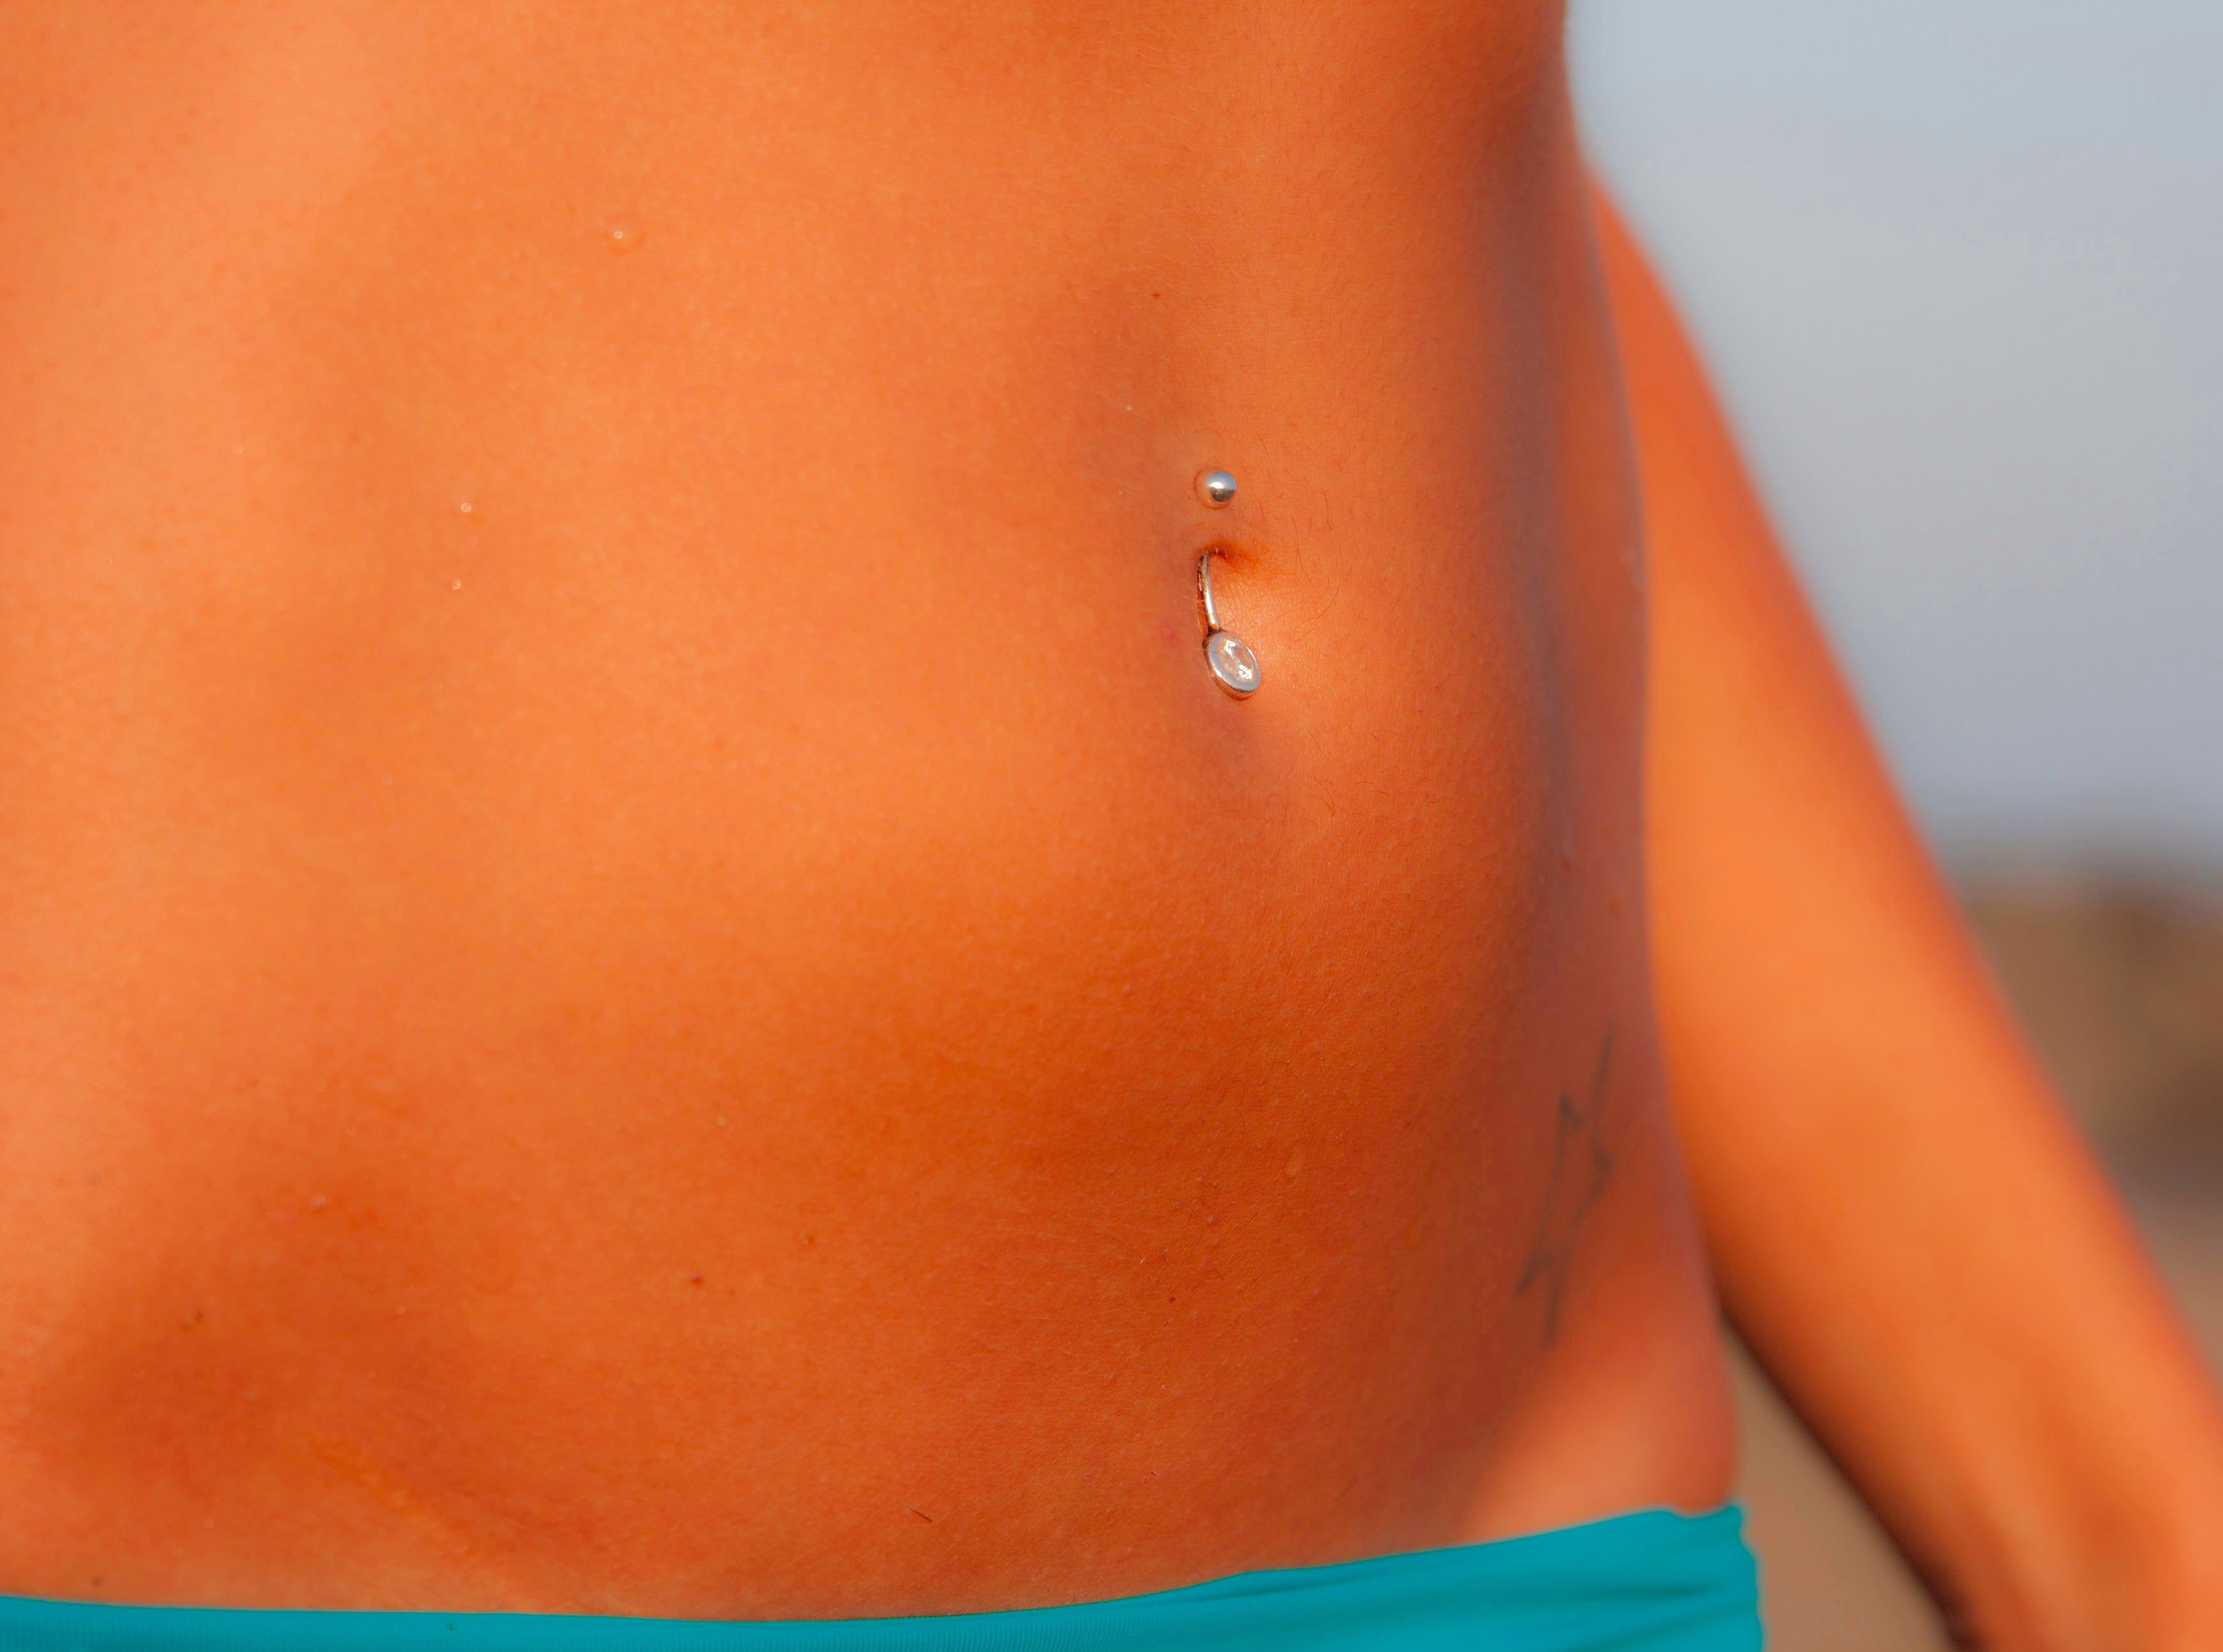 navel piercing infection image